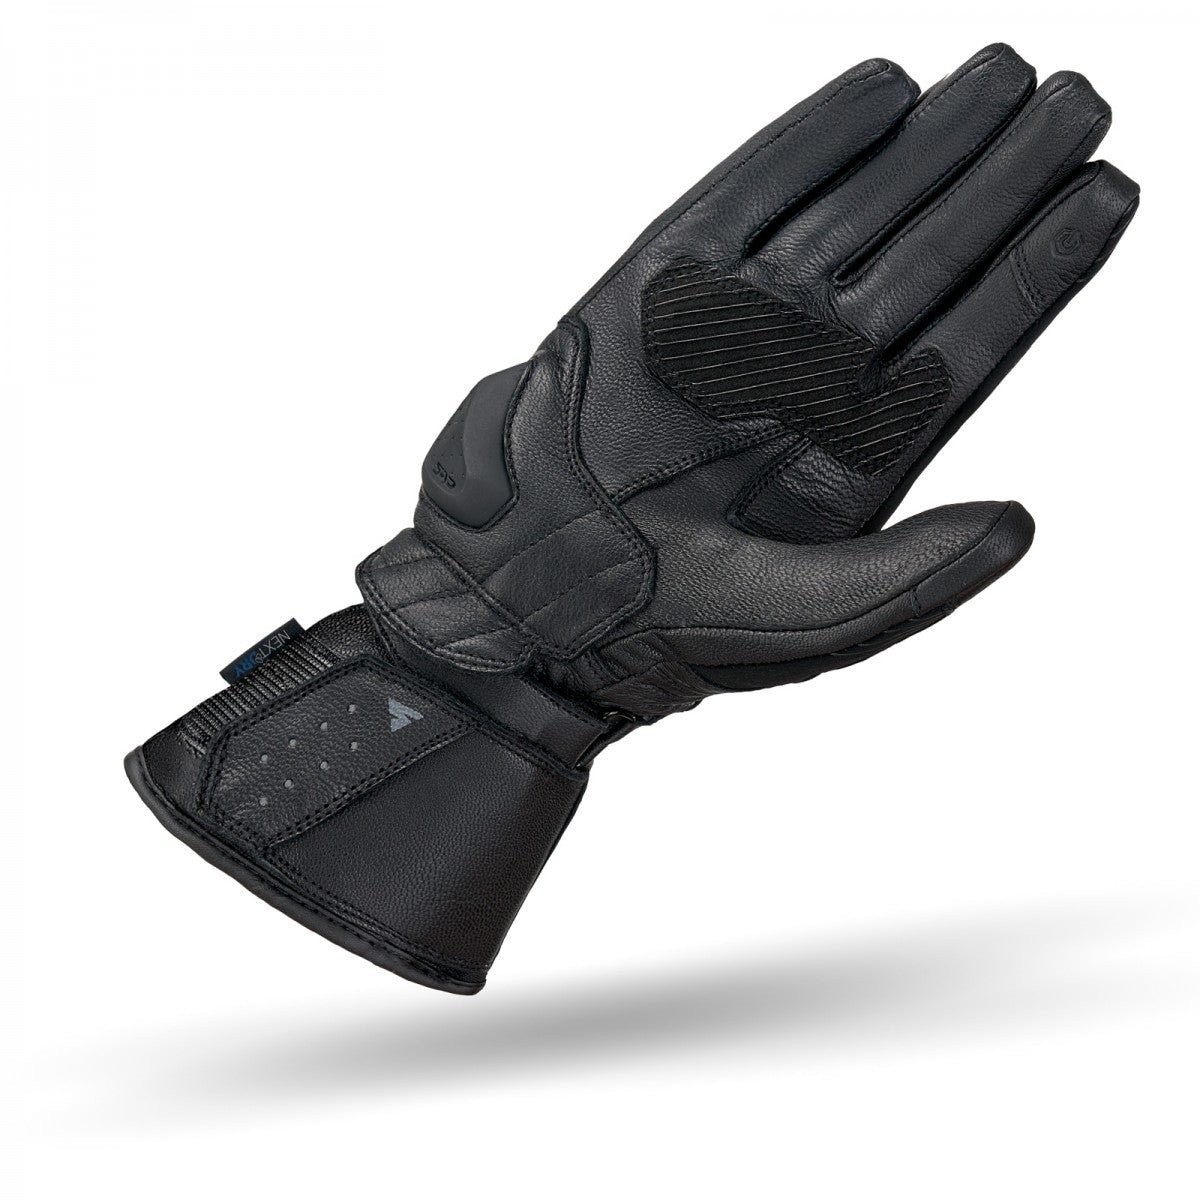 A palm of a Black women's motorcycle glove from Shima 